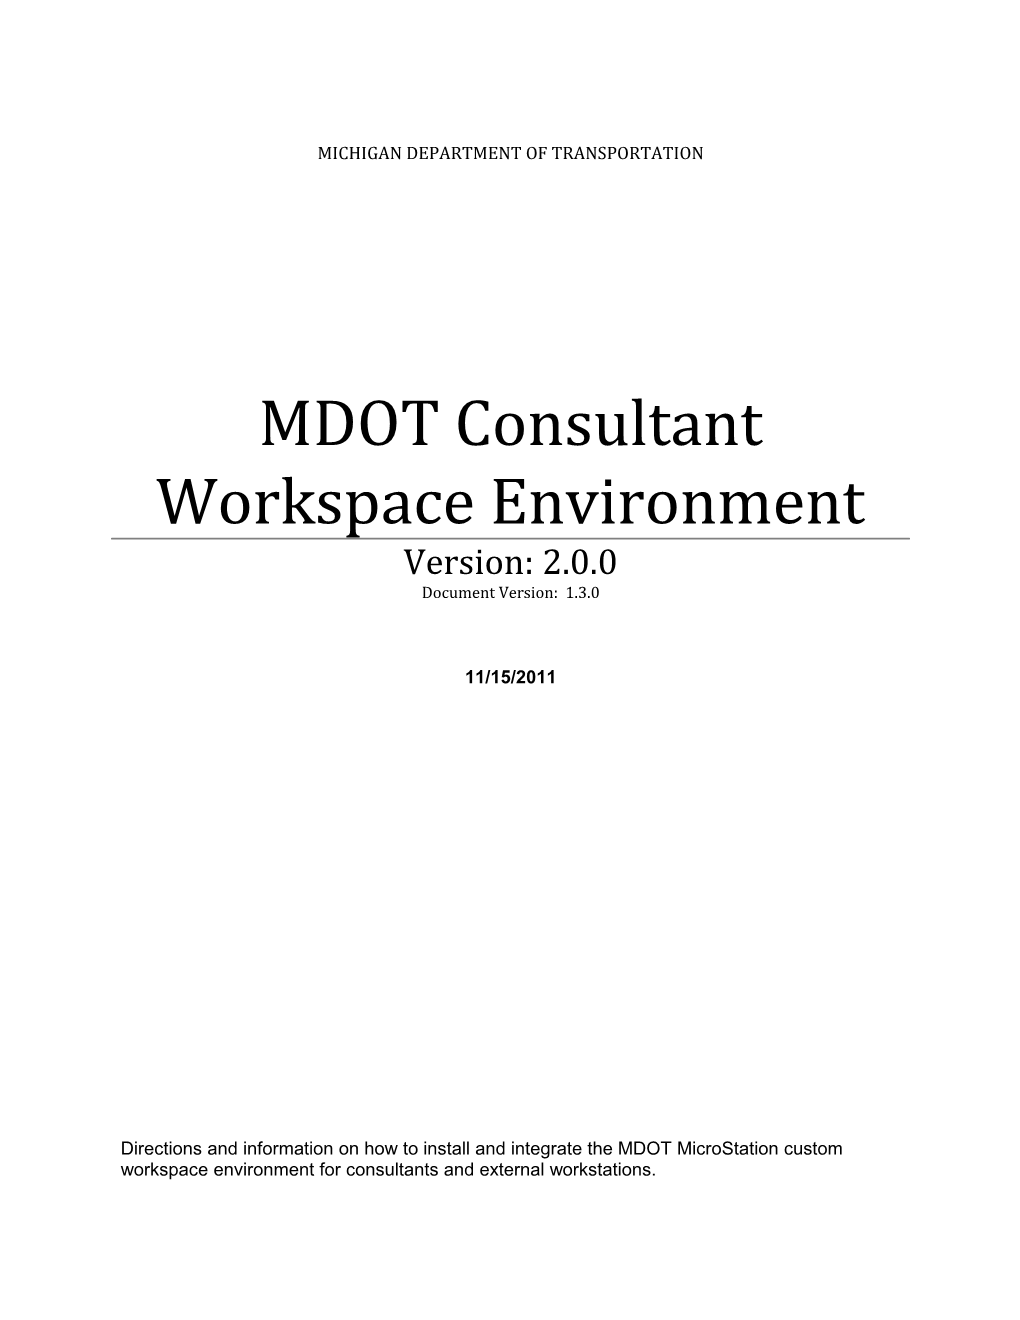 MDOT Consultant Workspace Environment